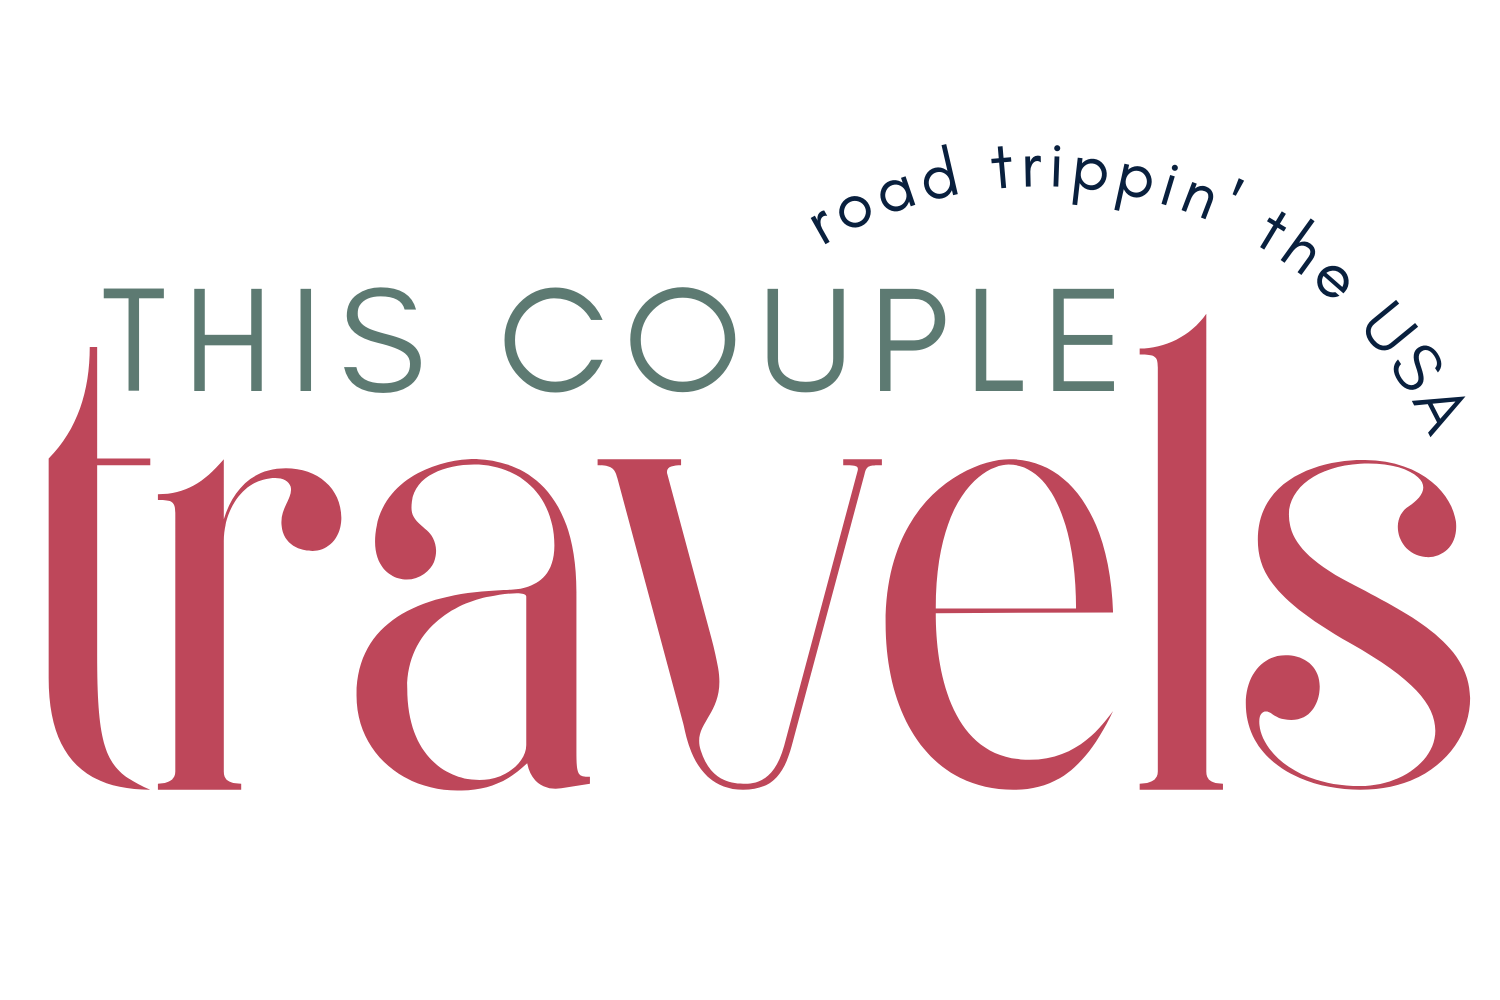 This Couple Travels